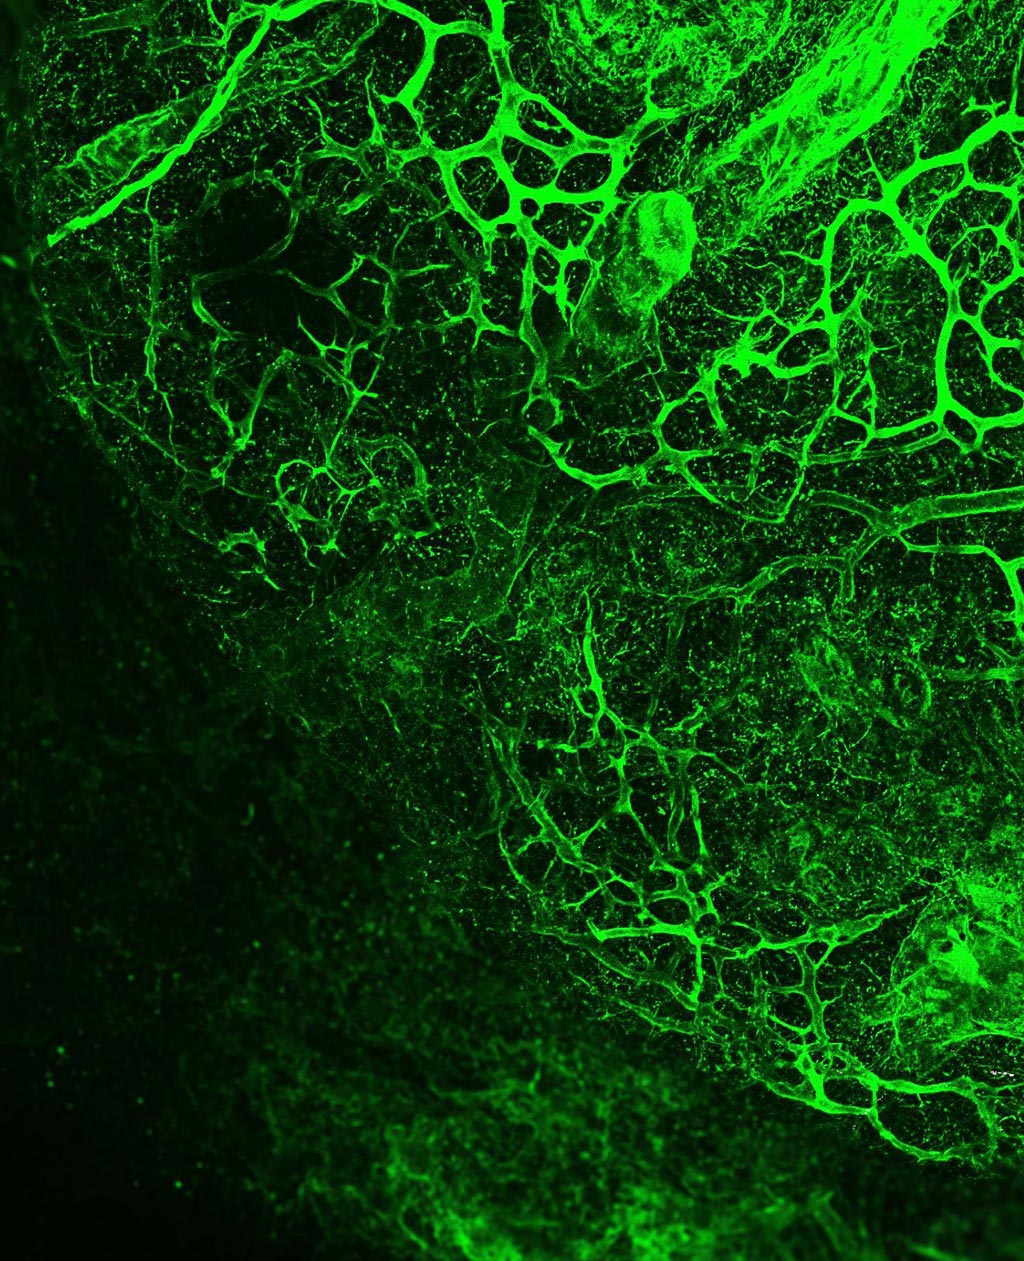 Image: The in situ decellularization of tissues (ISDoT) process reveals the ECM structure of a decellularized breast cancer lymphatic metastasis (Photo courtesy of Alejandro Mayorca-Guiliani).